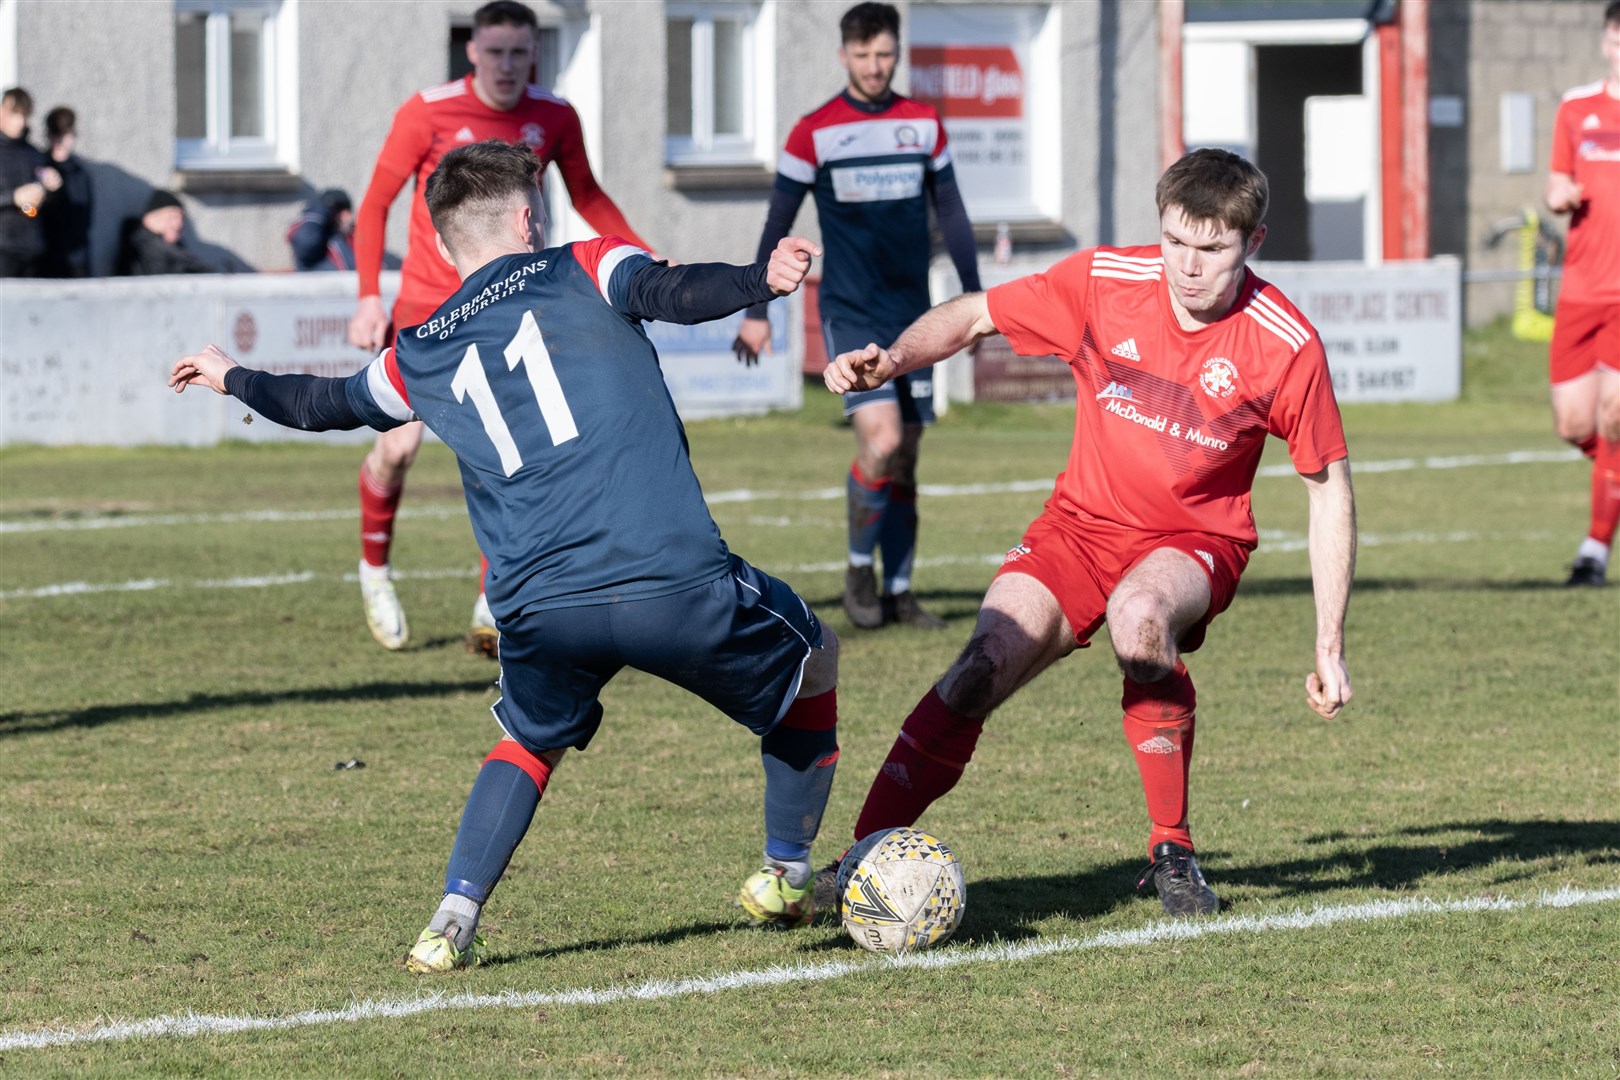 Turriff's Reece McKeown getting past Lossie's Ross Paterson. ..Lossiemouth F.C. v Turriff United F.C. at Grant Park...Picture: Beth Taylor.